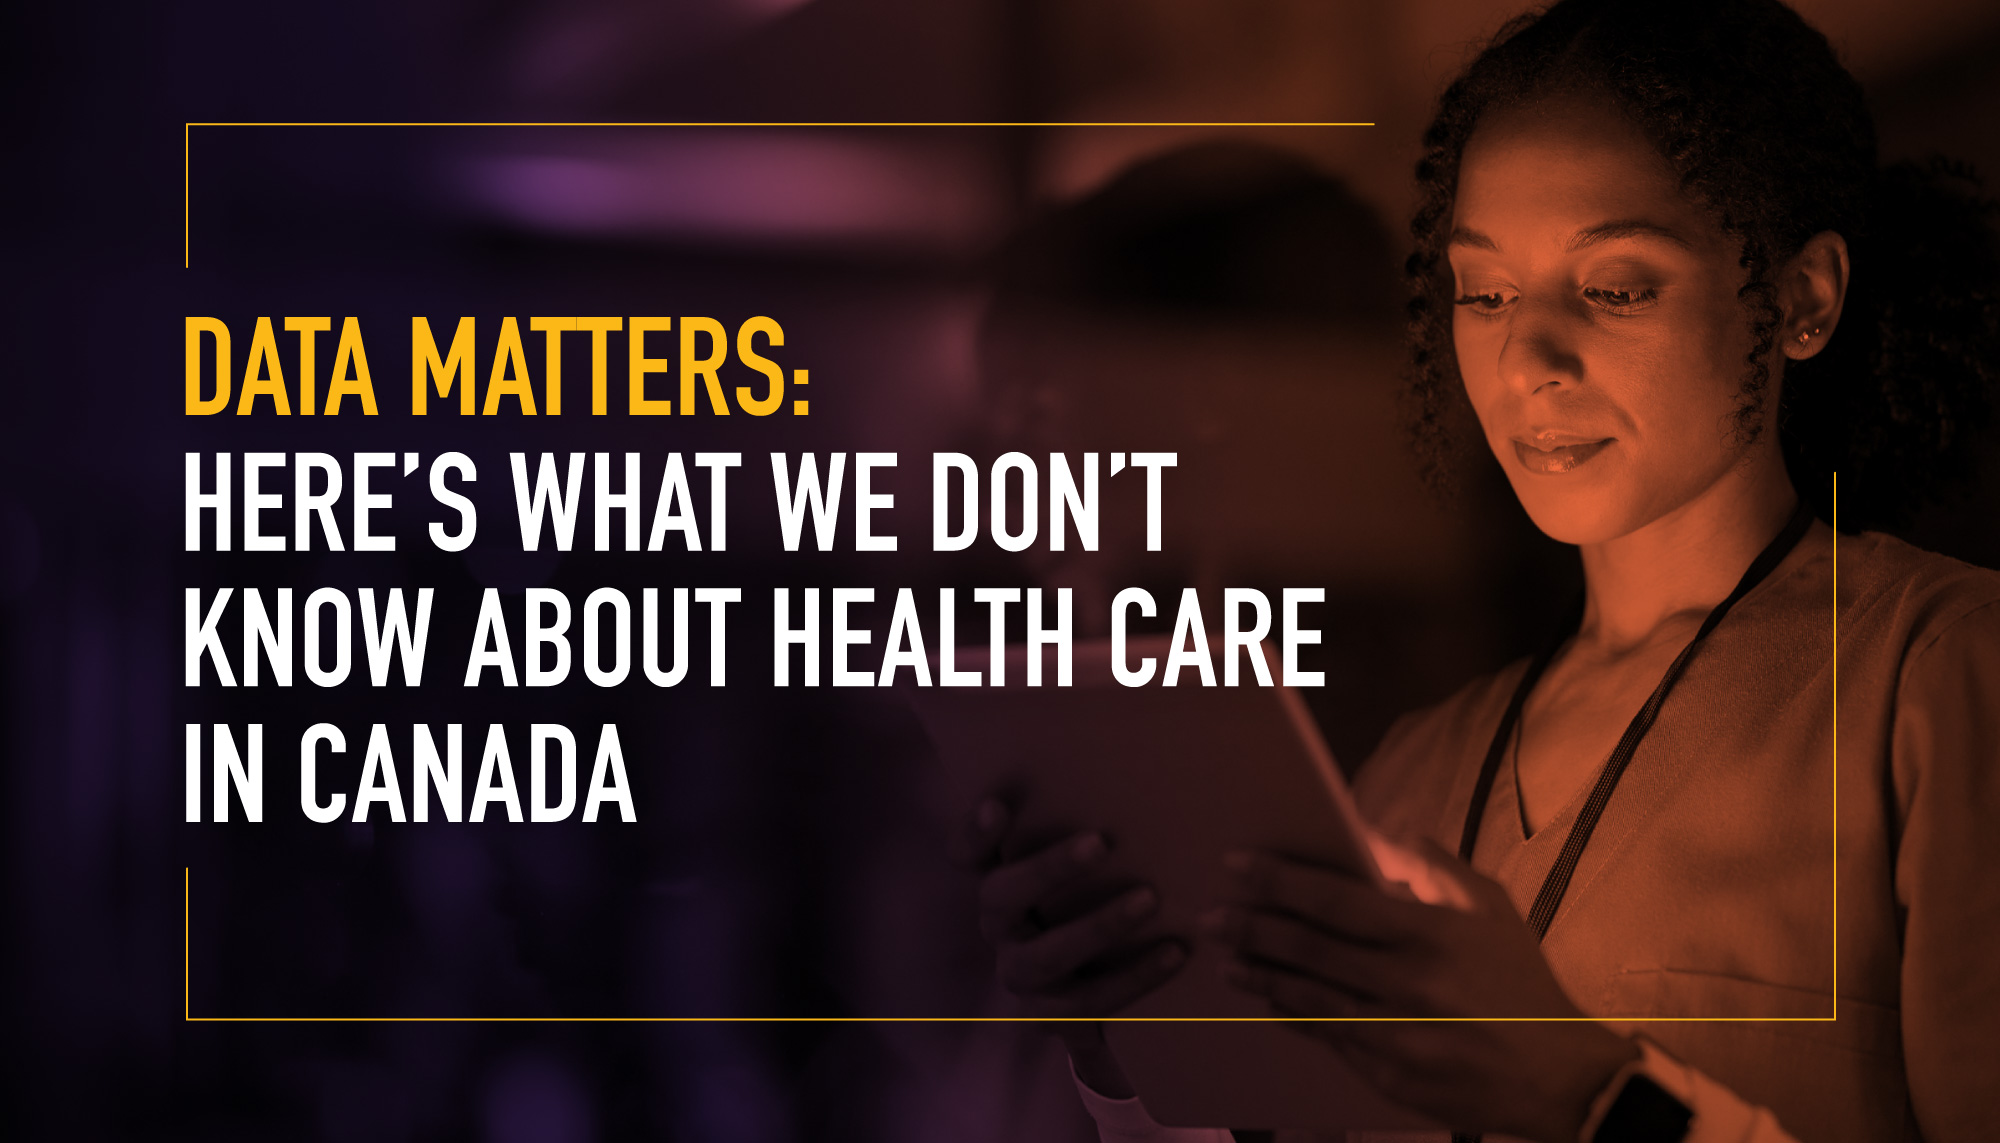 Data matters: Here's what we don't know about health care in Canada